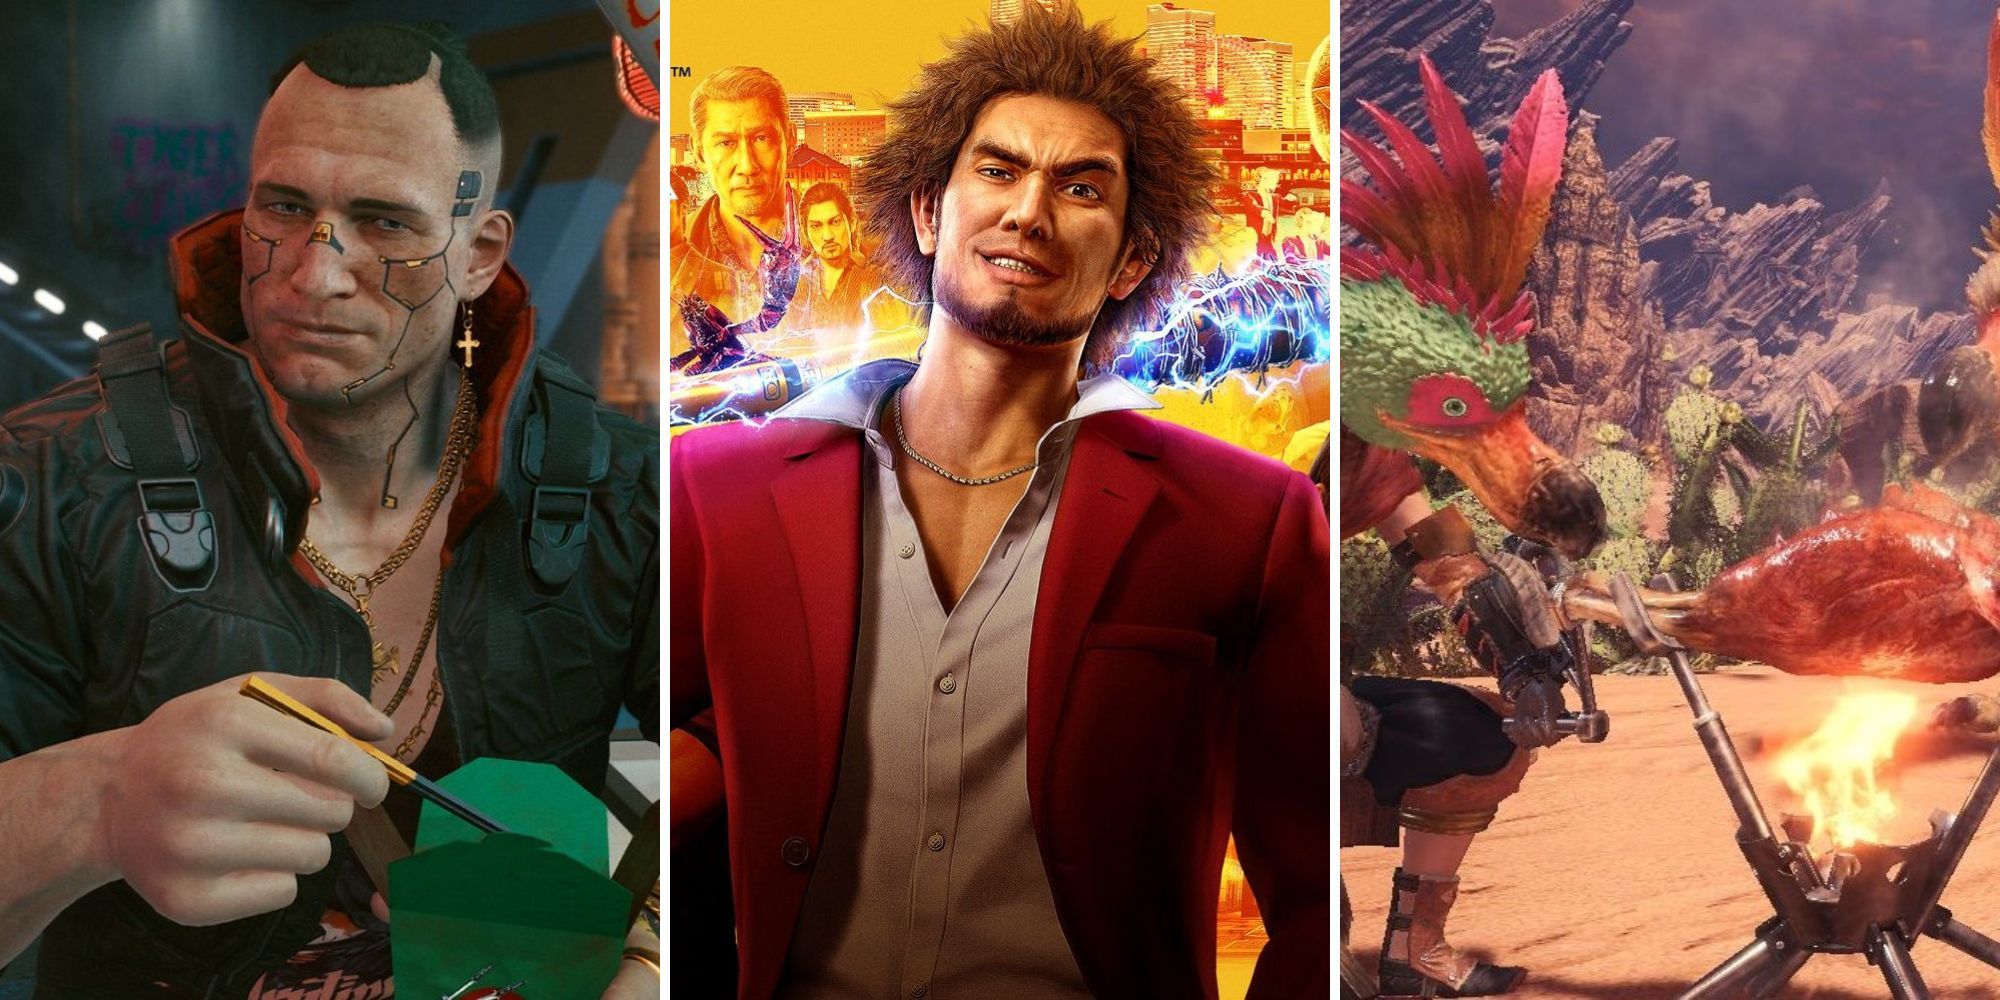 A grid of three images showing the RPGs Cyberpunk 2077, Yakuza: Like A Dragon, and Monster Hunter